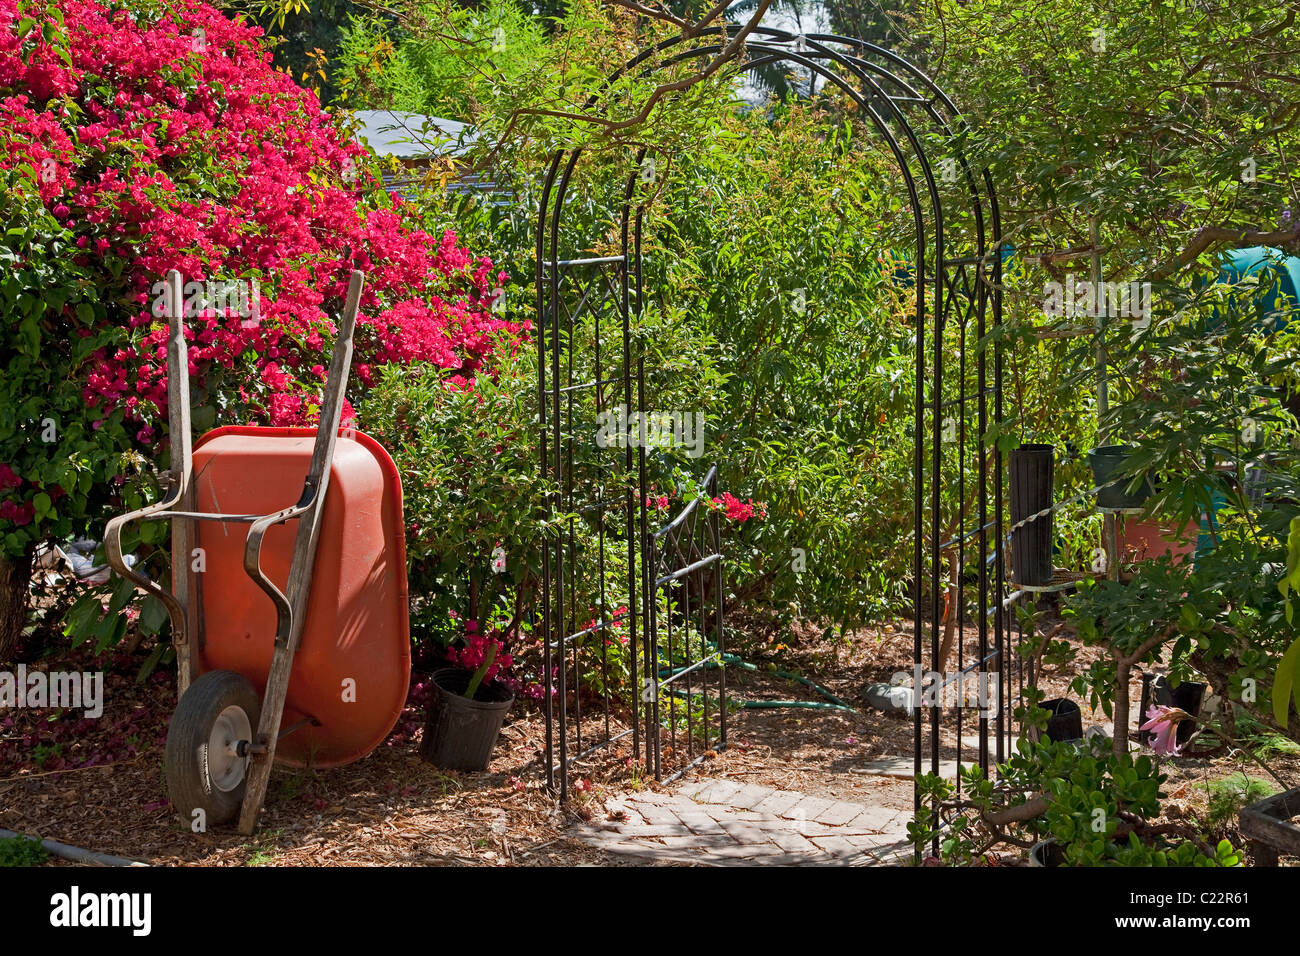 Edendale Farm is a model of permaculture and urban farming, Silver Lake, Loo Angeles Stock Photo